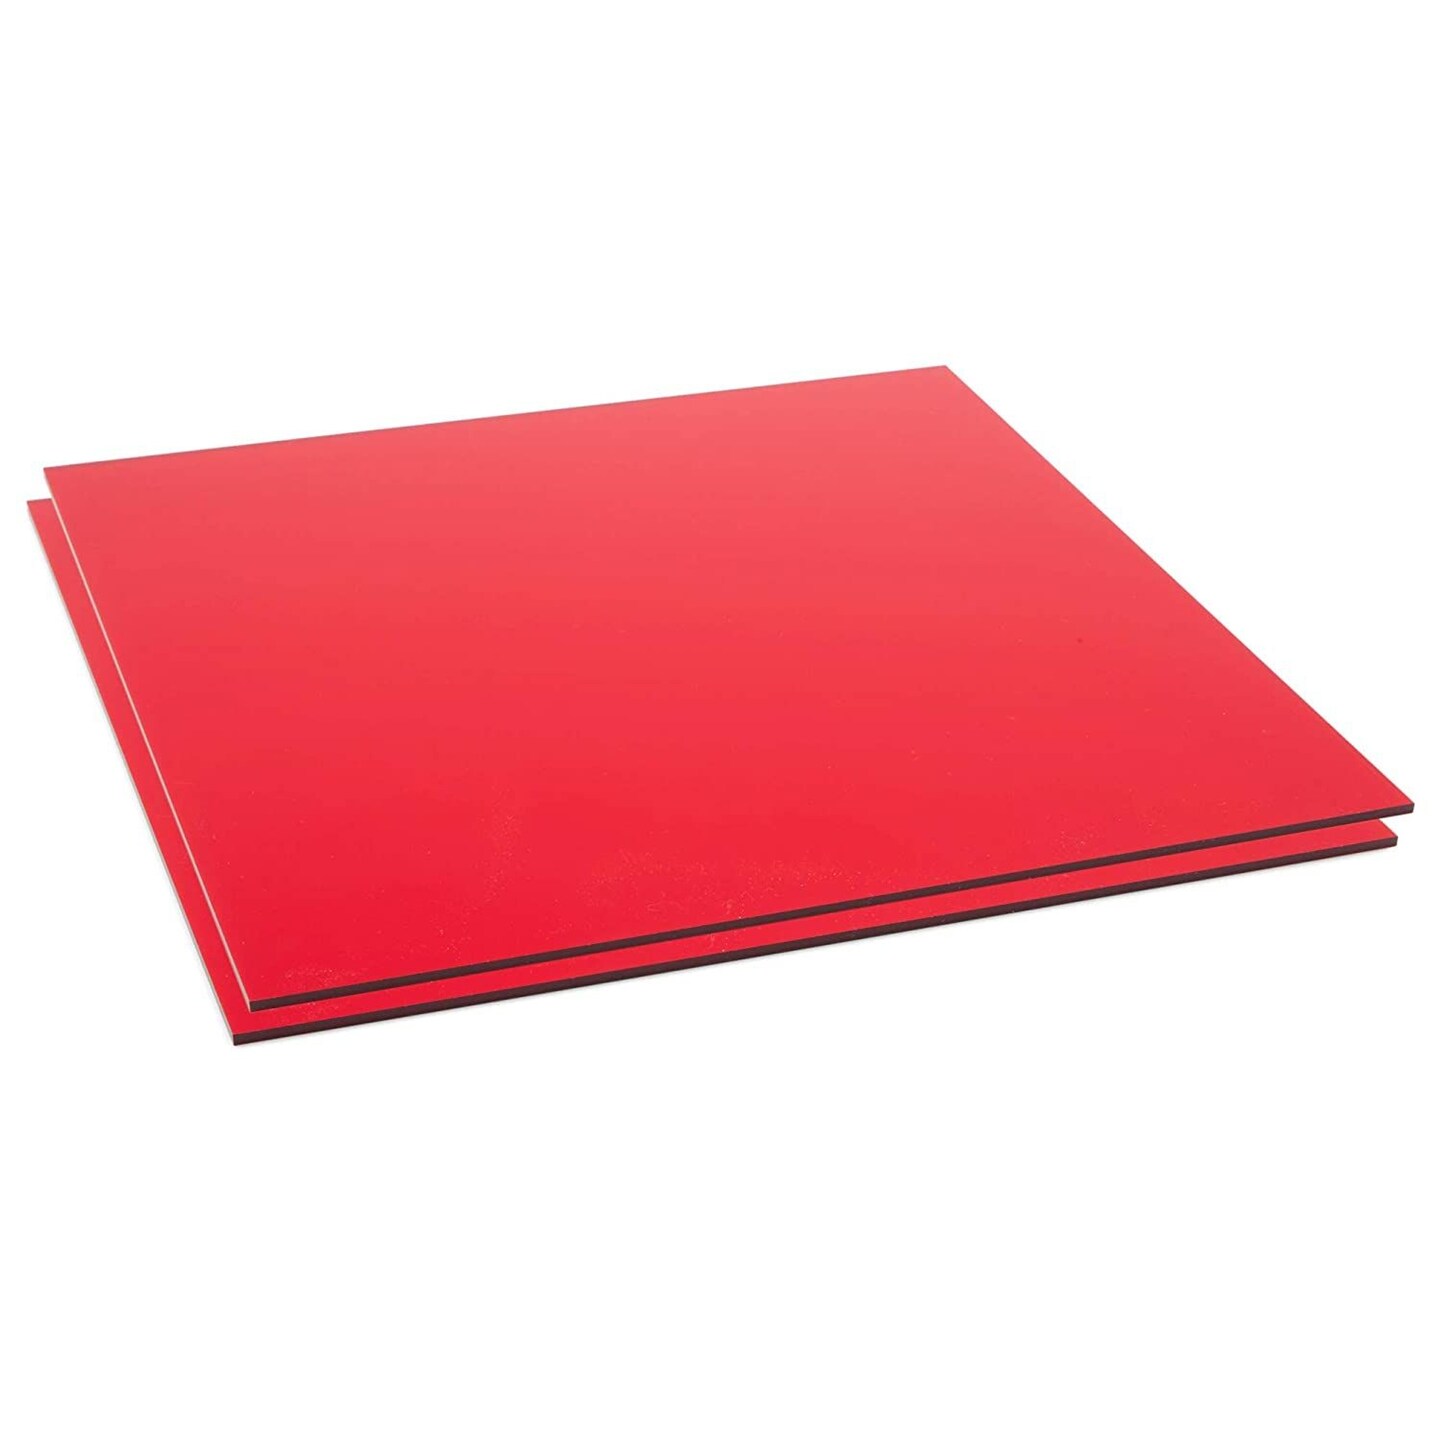 2 Pack Translucent Red Cast Acrylic Sheet, 1/8 Inch Thick (12 x 12 Inches)